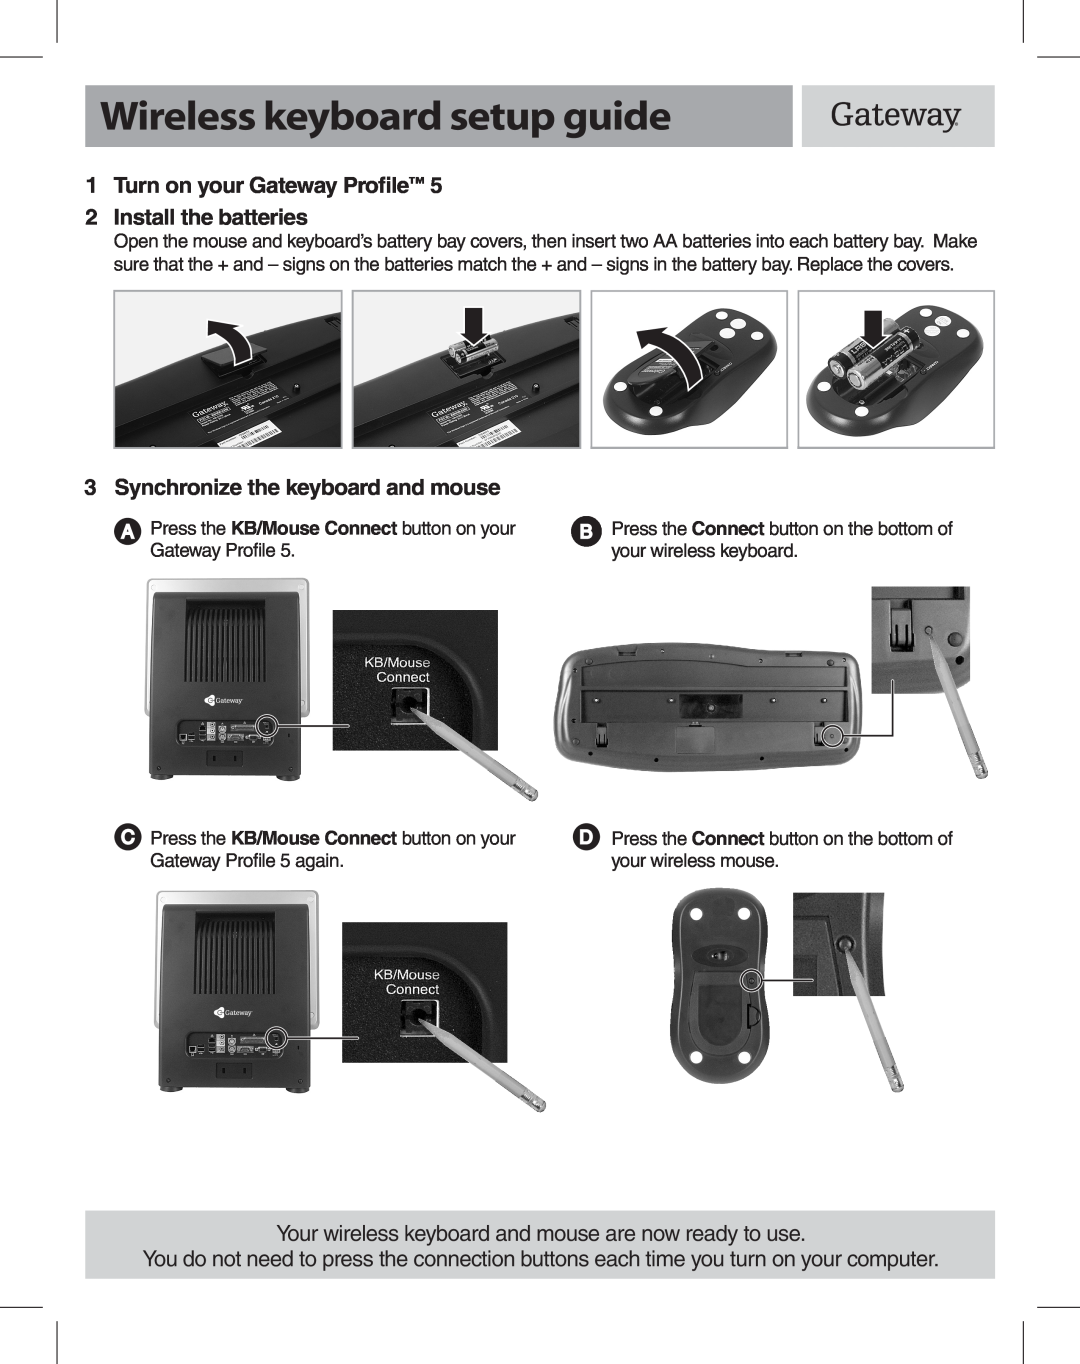 Gateway 5 setup guide Wireless keyboard setup guide, Turn on your Gateway Profile 2 Install the batteries 